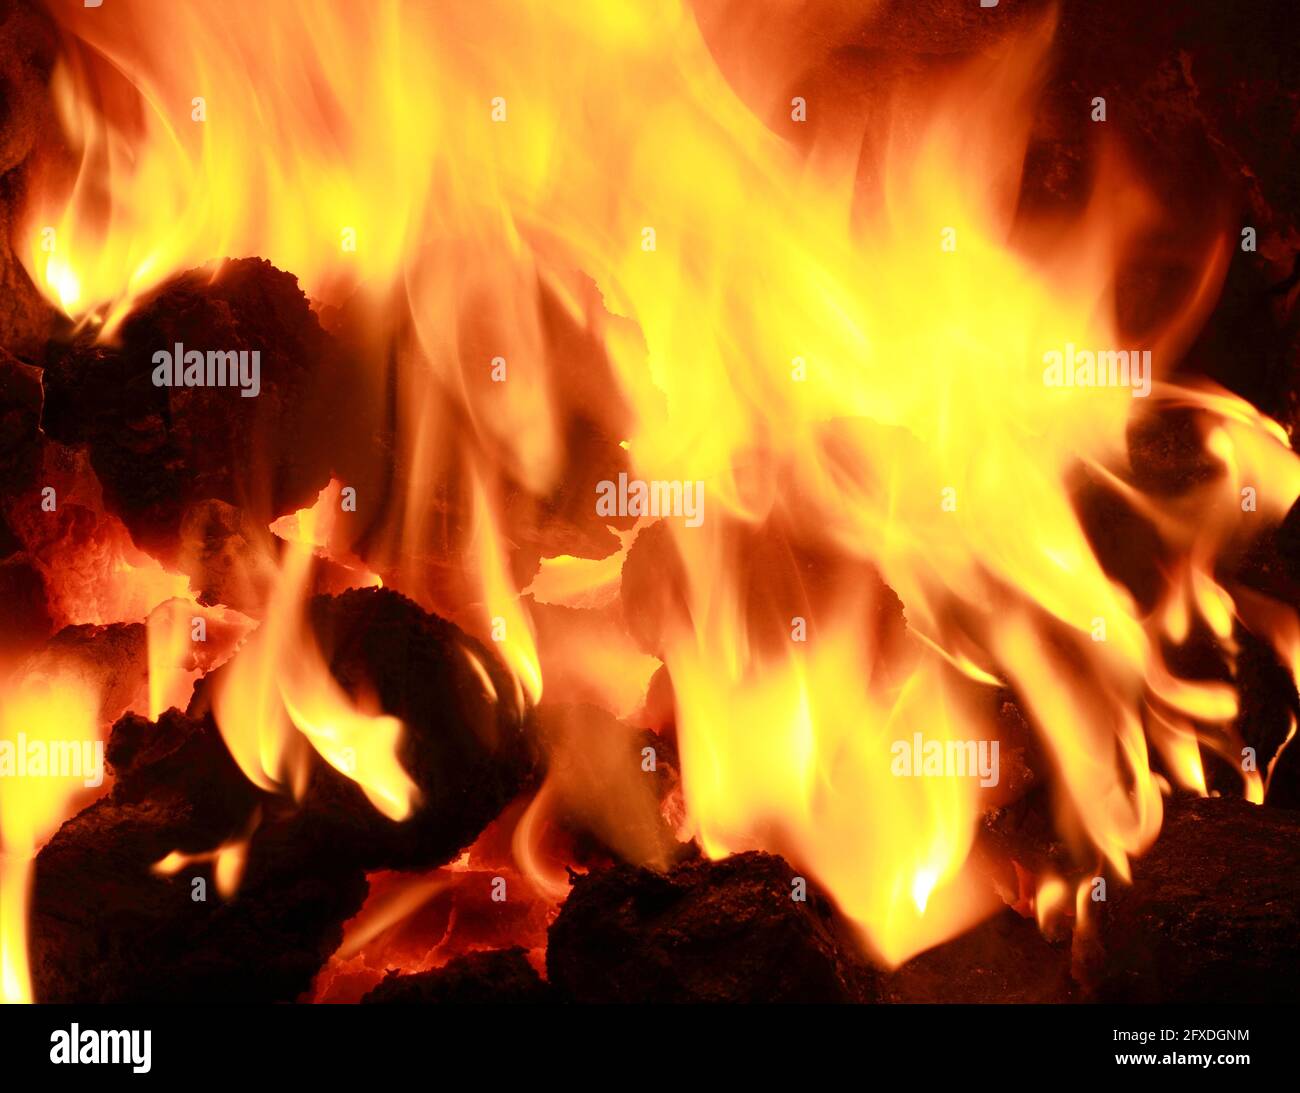 Domestic coal fire, burning, in hearth, fossil fuel, fuels, heat, warmth, flame, flames Stock Photo